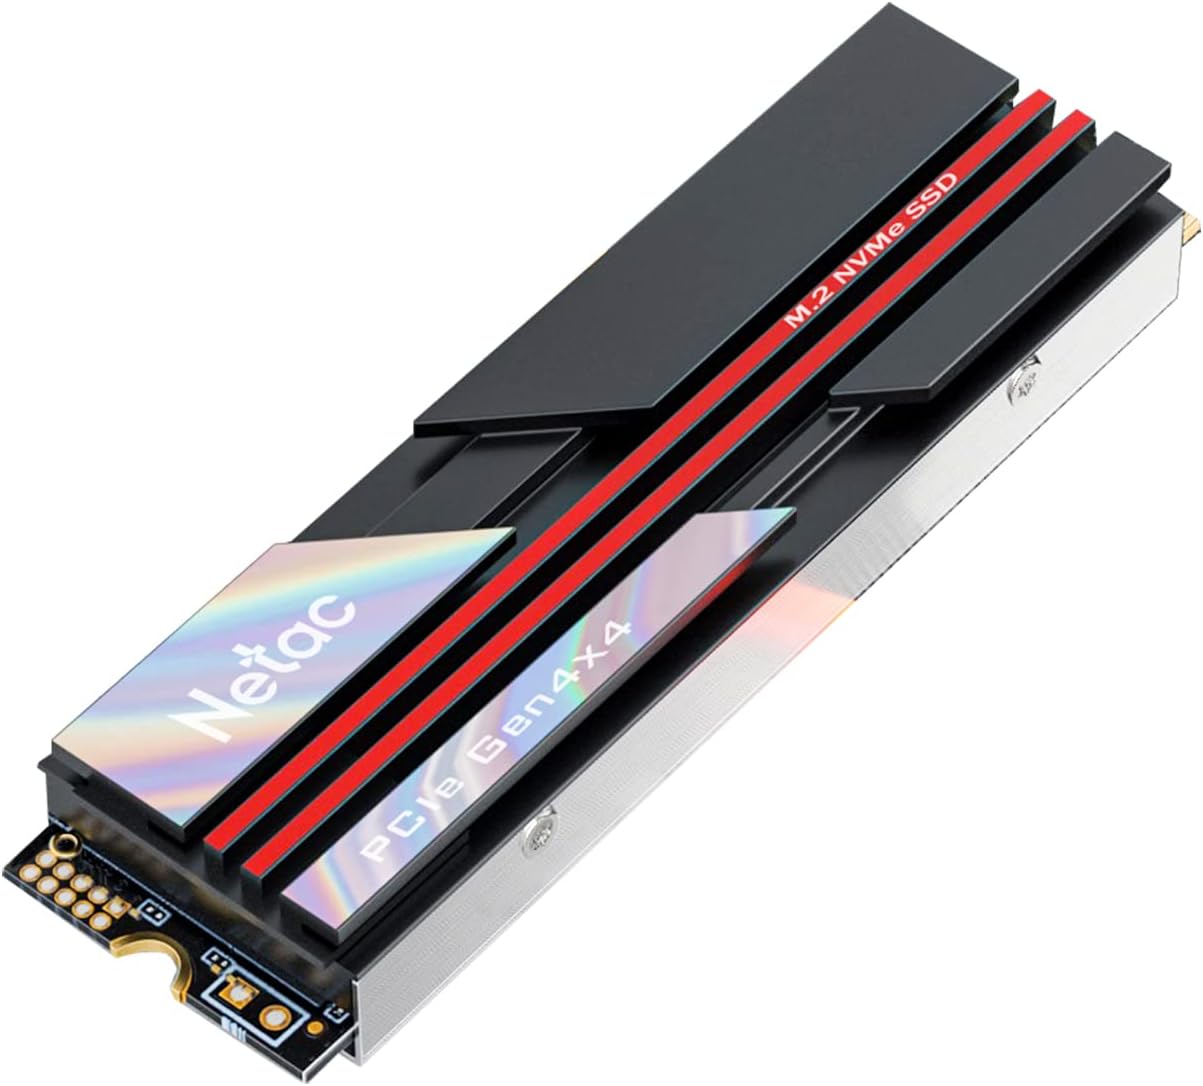 Netac 2TB PCIe 4.0 NVMe SSD M.2 2280 Internal Solid State Drive with Heatsink SLC Caching Speed up to 7,000MB/s High-Performance for PCs Desktop, Works with PS5, Heat Control Easy to Install- NV7000